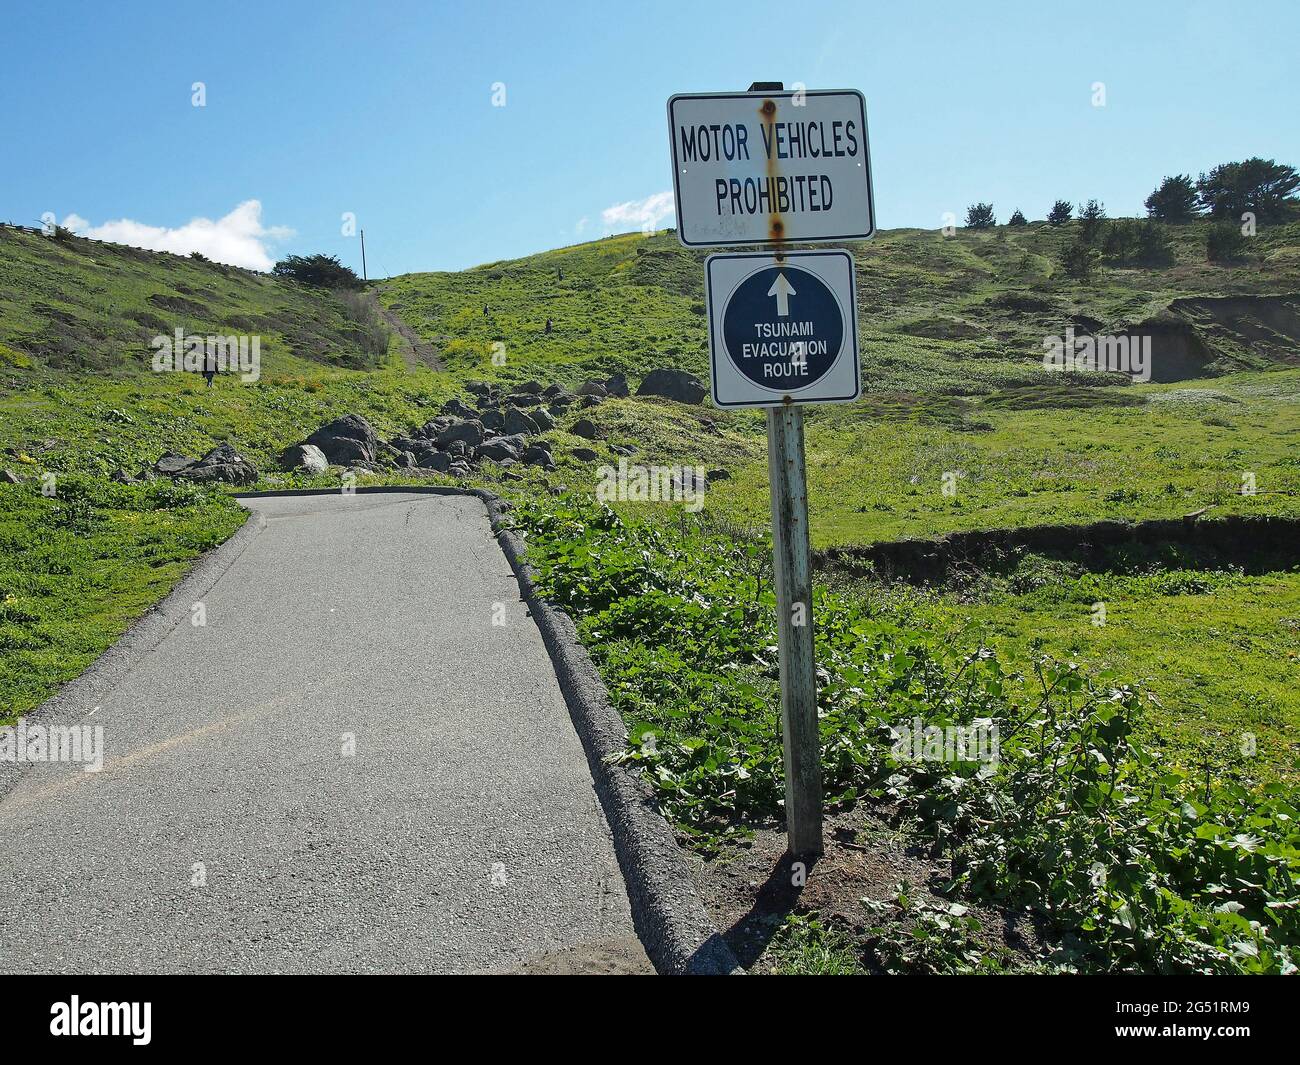 Tsunami Evacuation route and motor vehicles prohibited sign in Pacifica, California Stock Photo